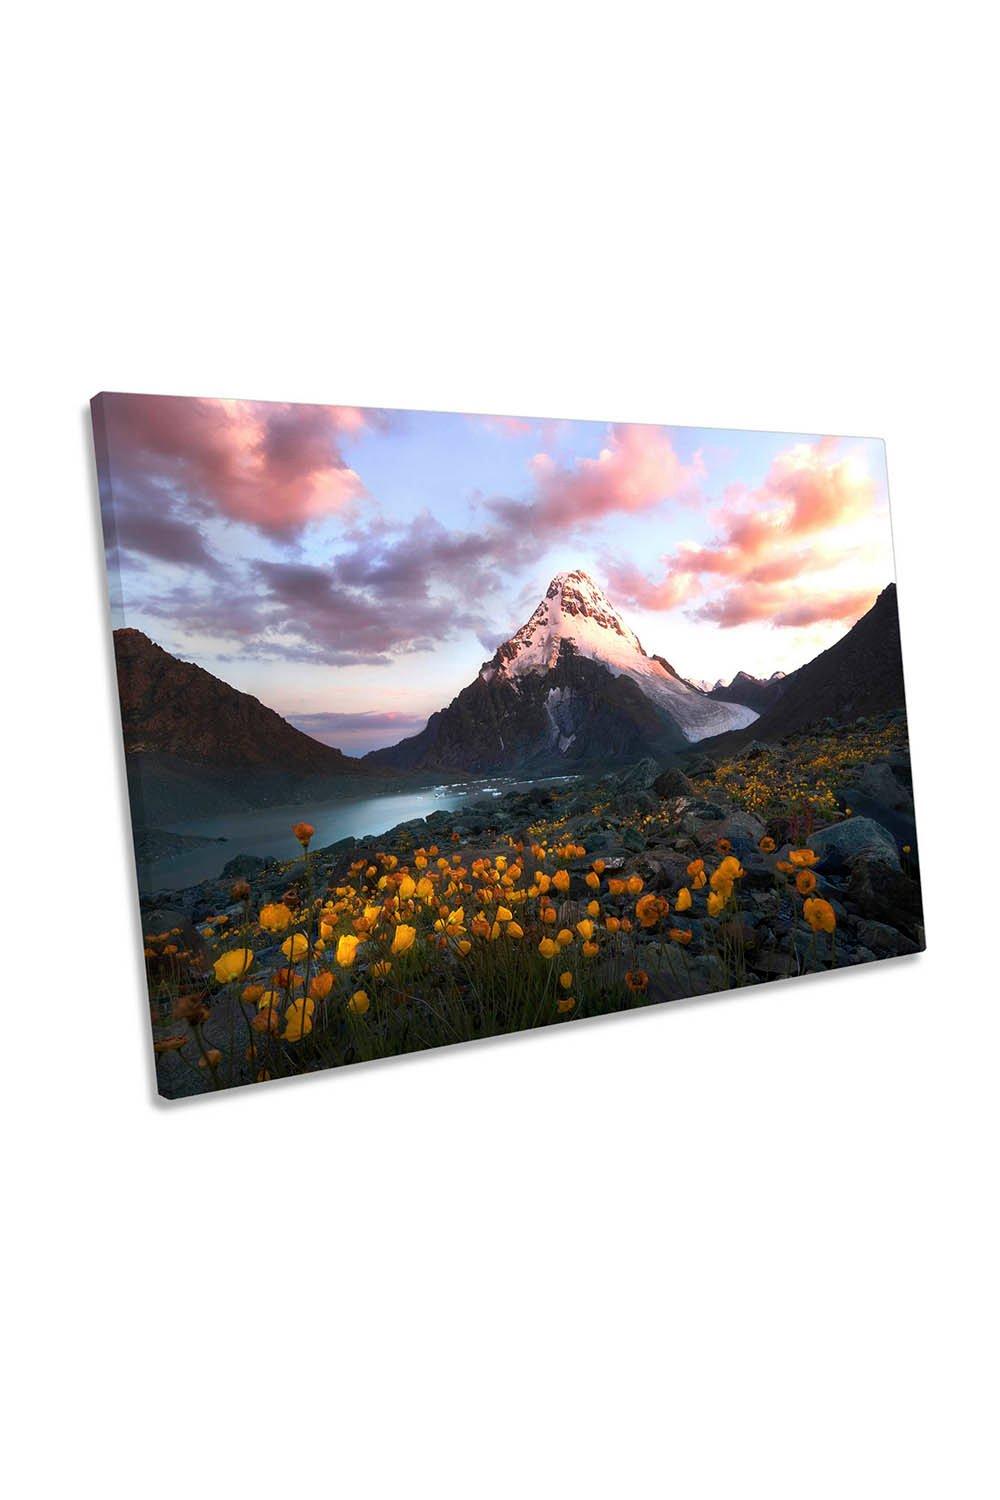 Yellow Flowers Mountain Landscape Canvas Wall Art Picture Print